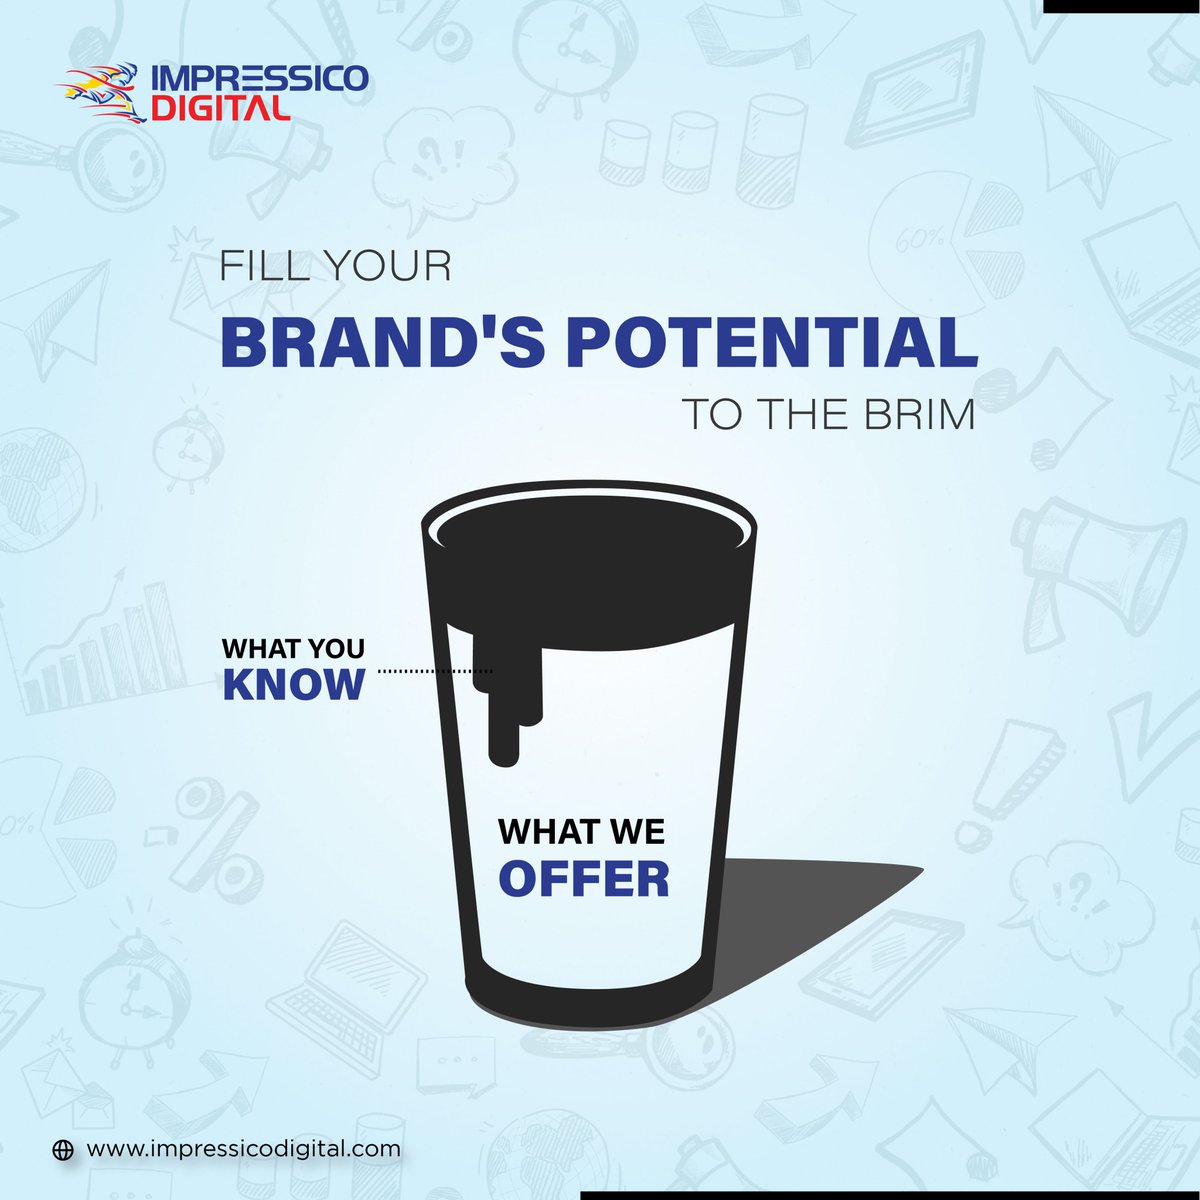 Take your brand to new heights with Impressico Digital!
  
Simple yet powerful marketing that connects you to your audience. 

Let's make your brand unforgettable. Start now at impressicodigital.com 

#ImpressicoDigital #GrowYourBrand #DigitalImpact #MarketingThatWorks